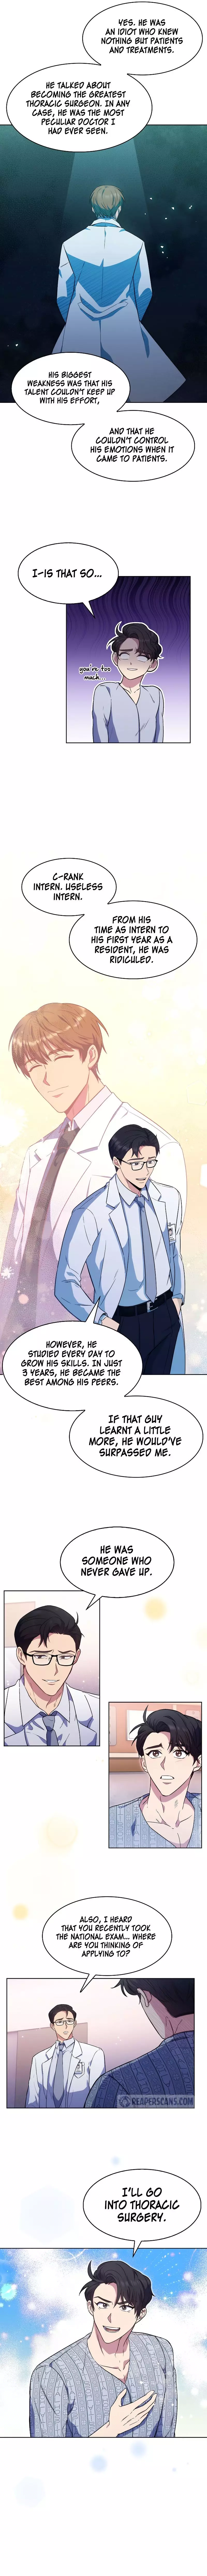 Level-Up Doctor (Manhwa) - 2 page 12-99ce0804